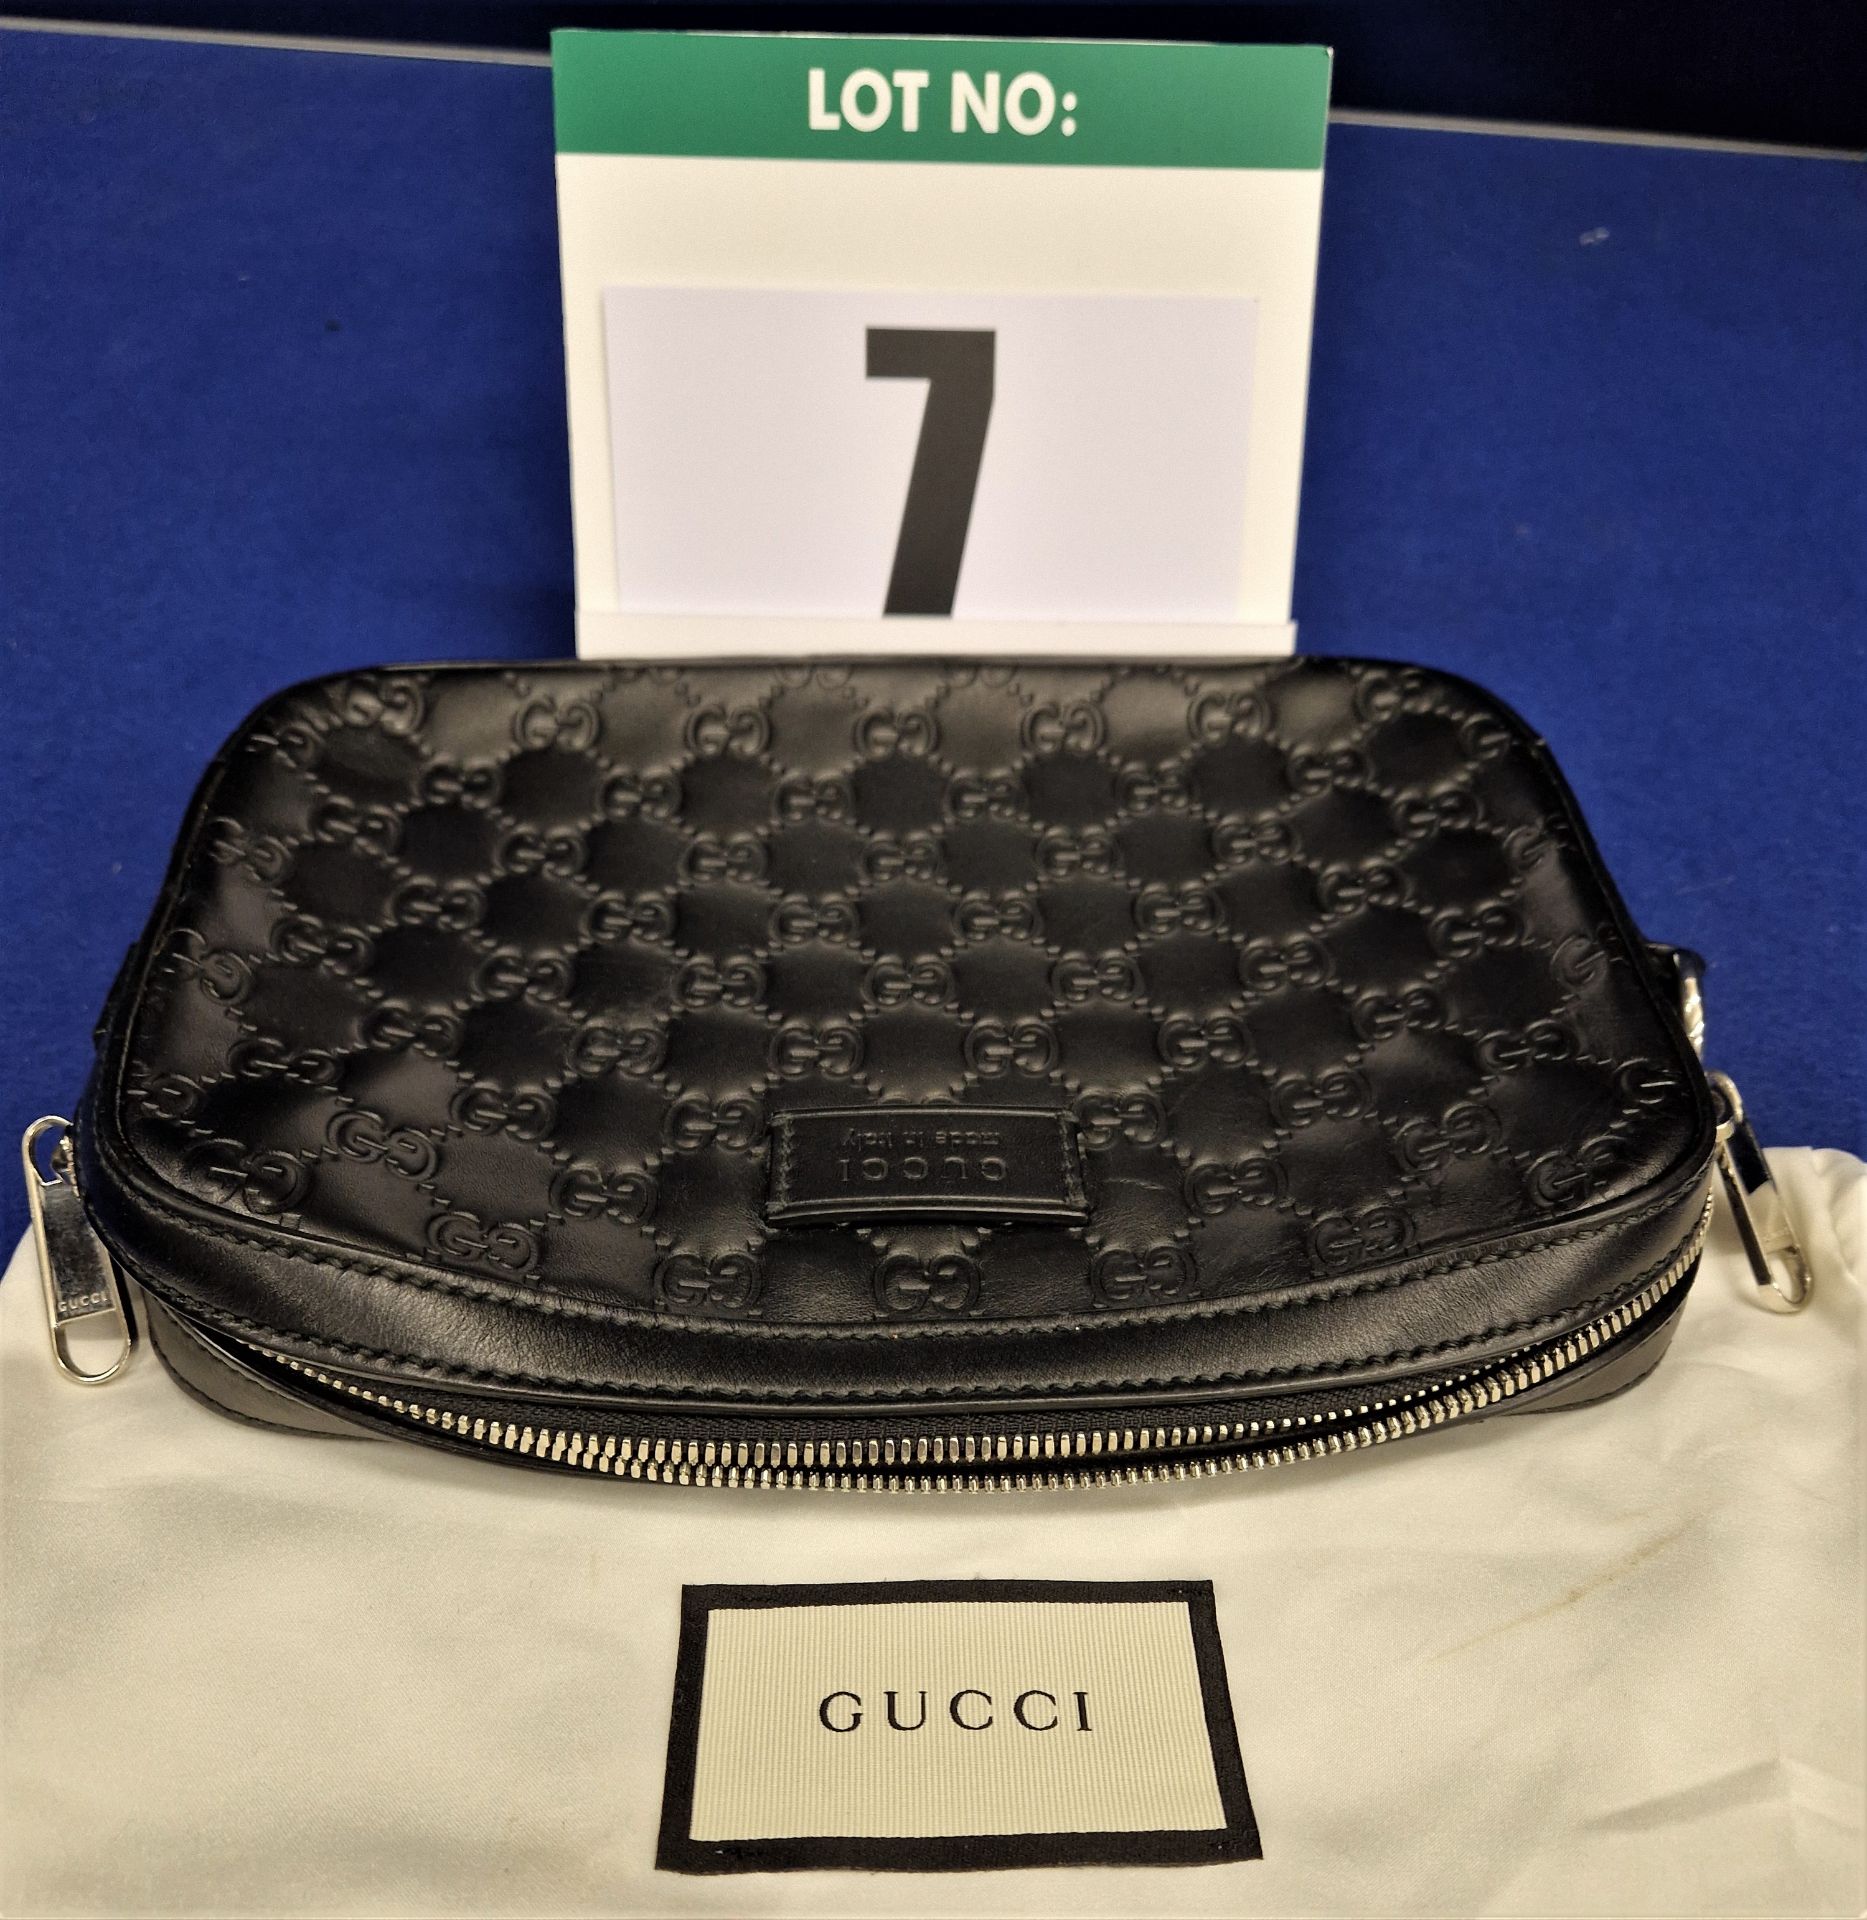 A GUCCI Black Double G Monogram Embossed Leather Pouch/Clutch Bag with Grey Suedette Lining,